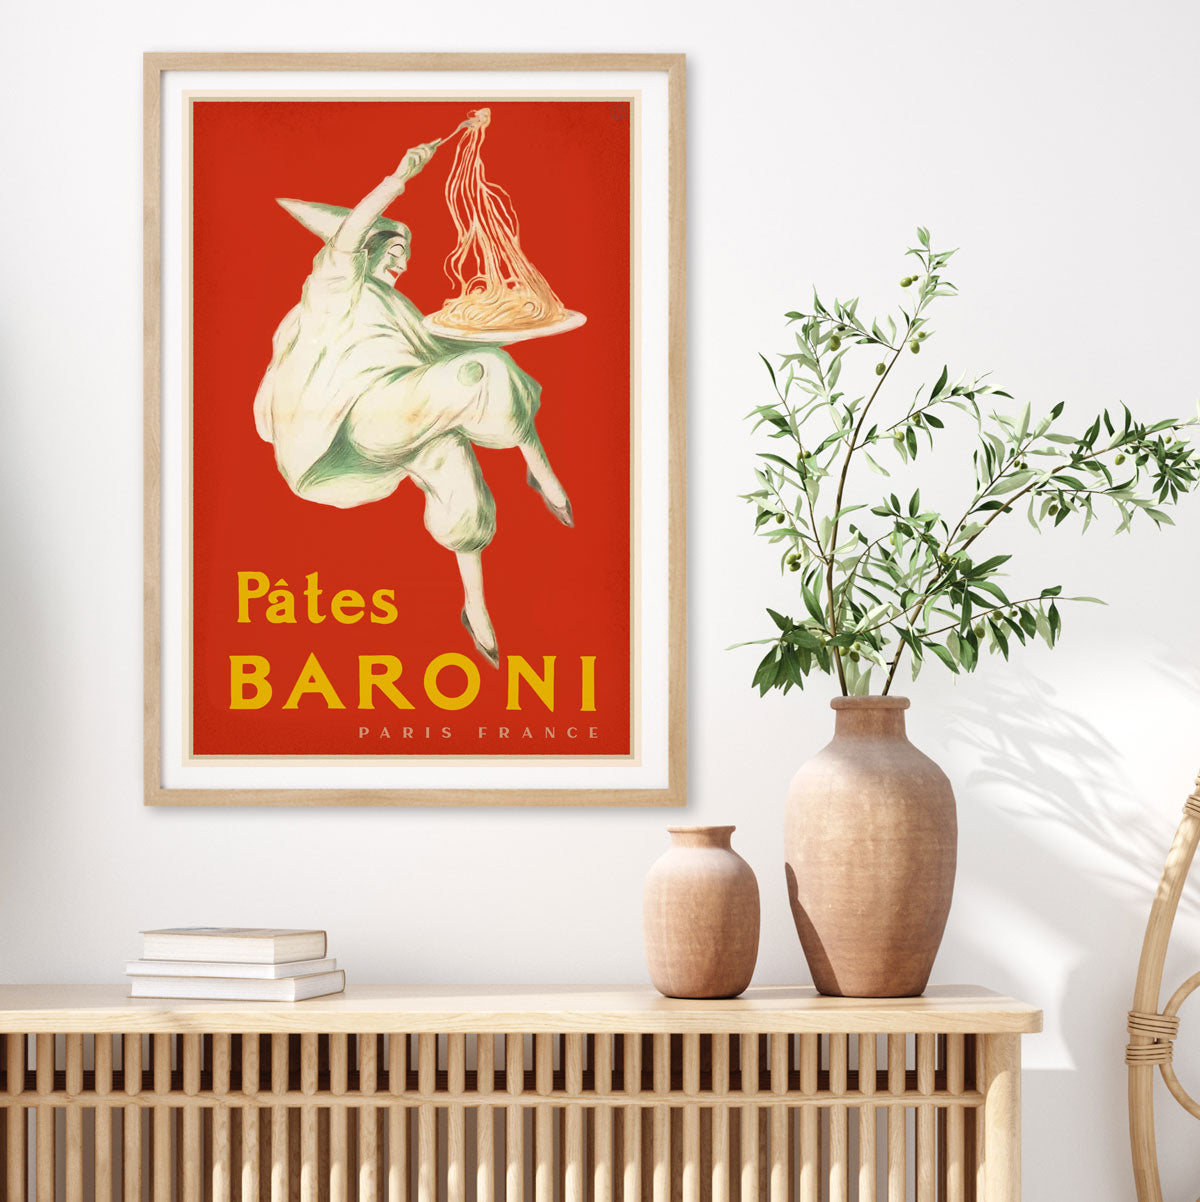 Pates Baroni Paris, French pasta retro advertising poster from Places We Luv